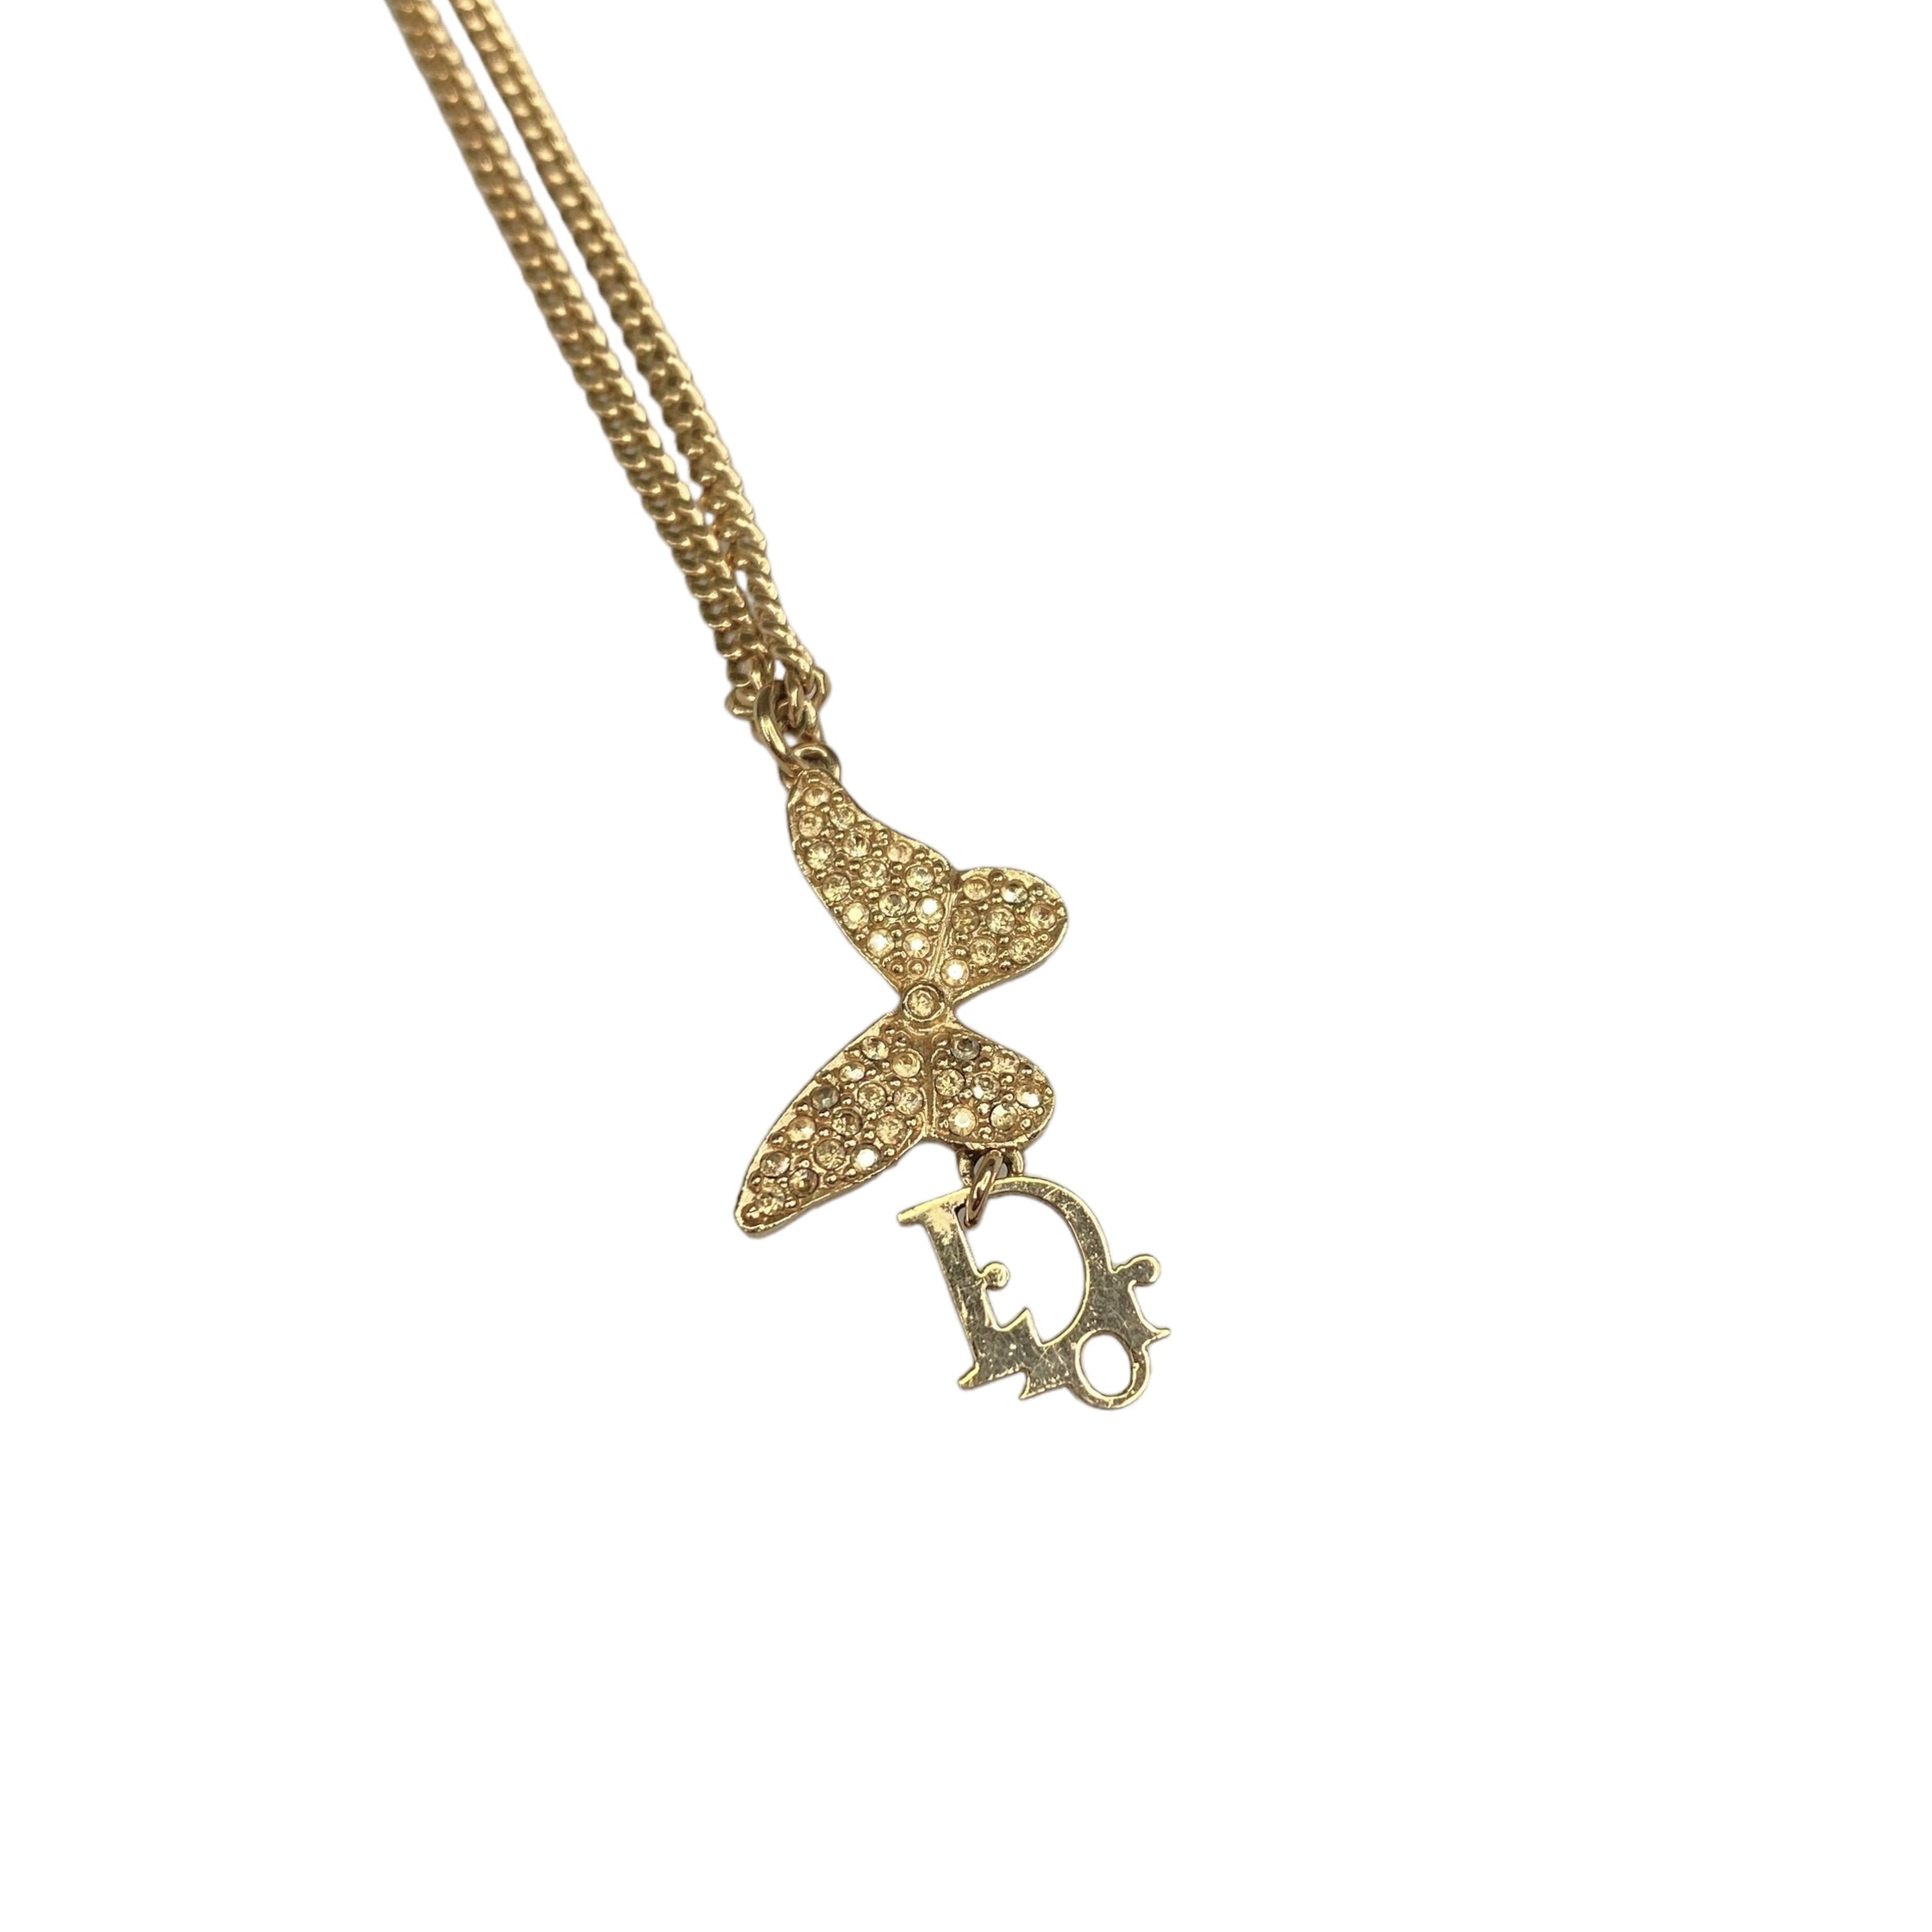 DIOR OBLIQUE LOGO & RHINESTONE BUTTERFLY PENDANT NECKLACE GOLD-PLATED